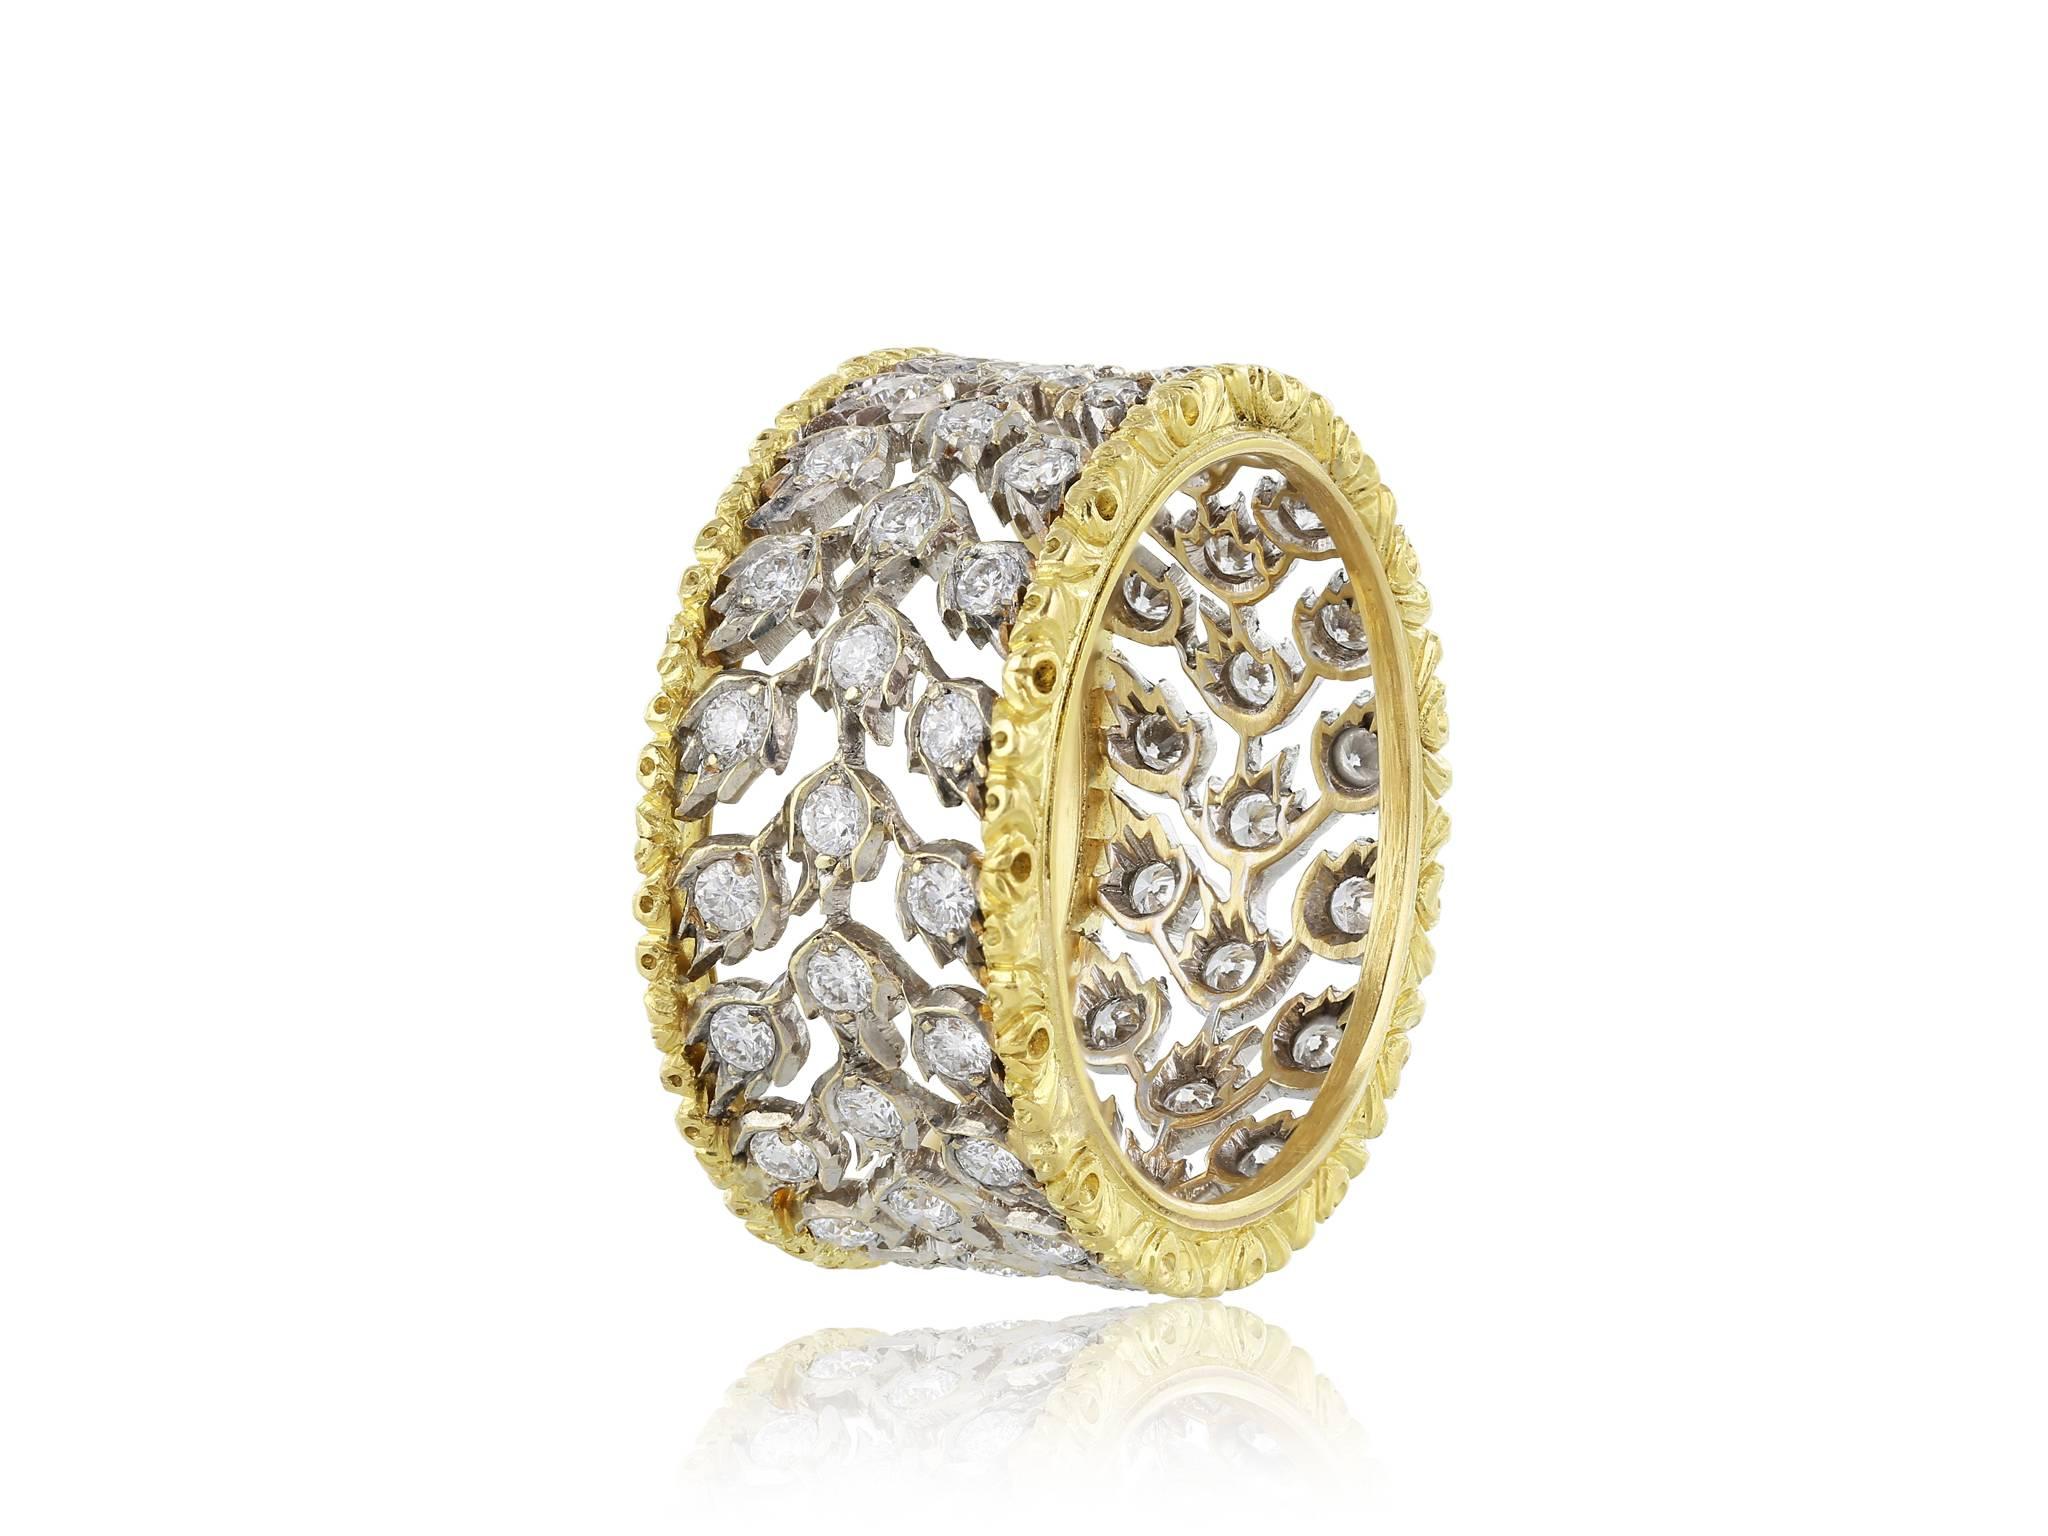 18 karat yellow and white gold Buccellati ring from the Milano collection. Ring features Round Brilliant Cut diamonds set on an open work setting weighing a total of 1.10 carats. Size 7.25.